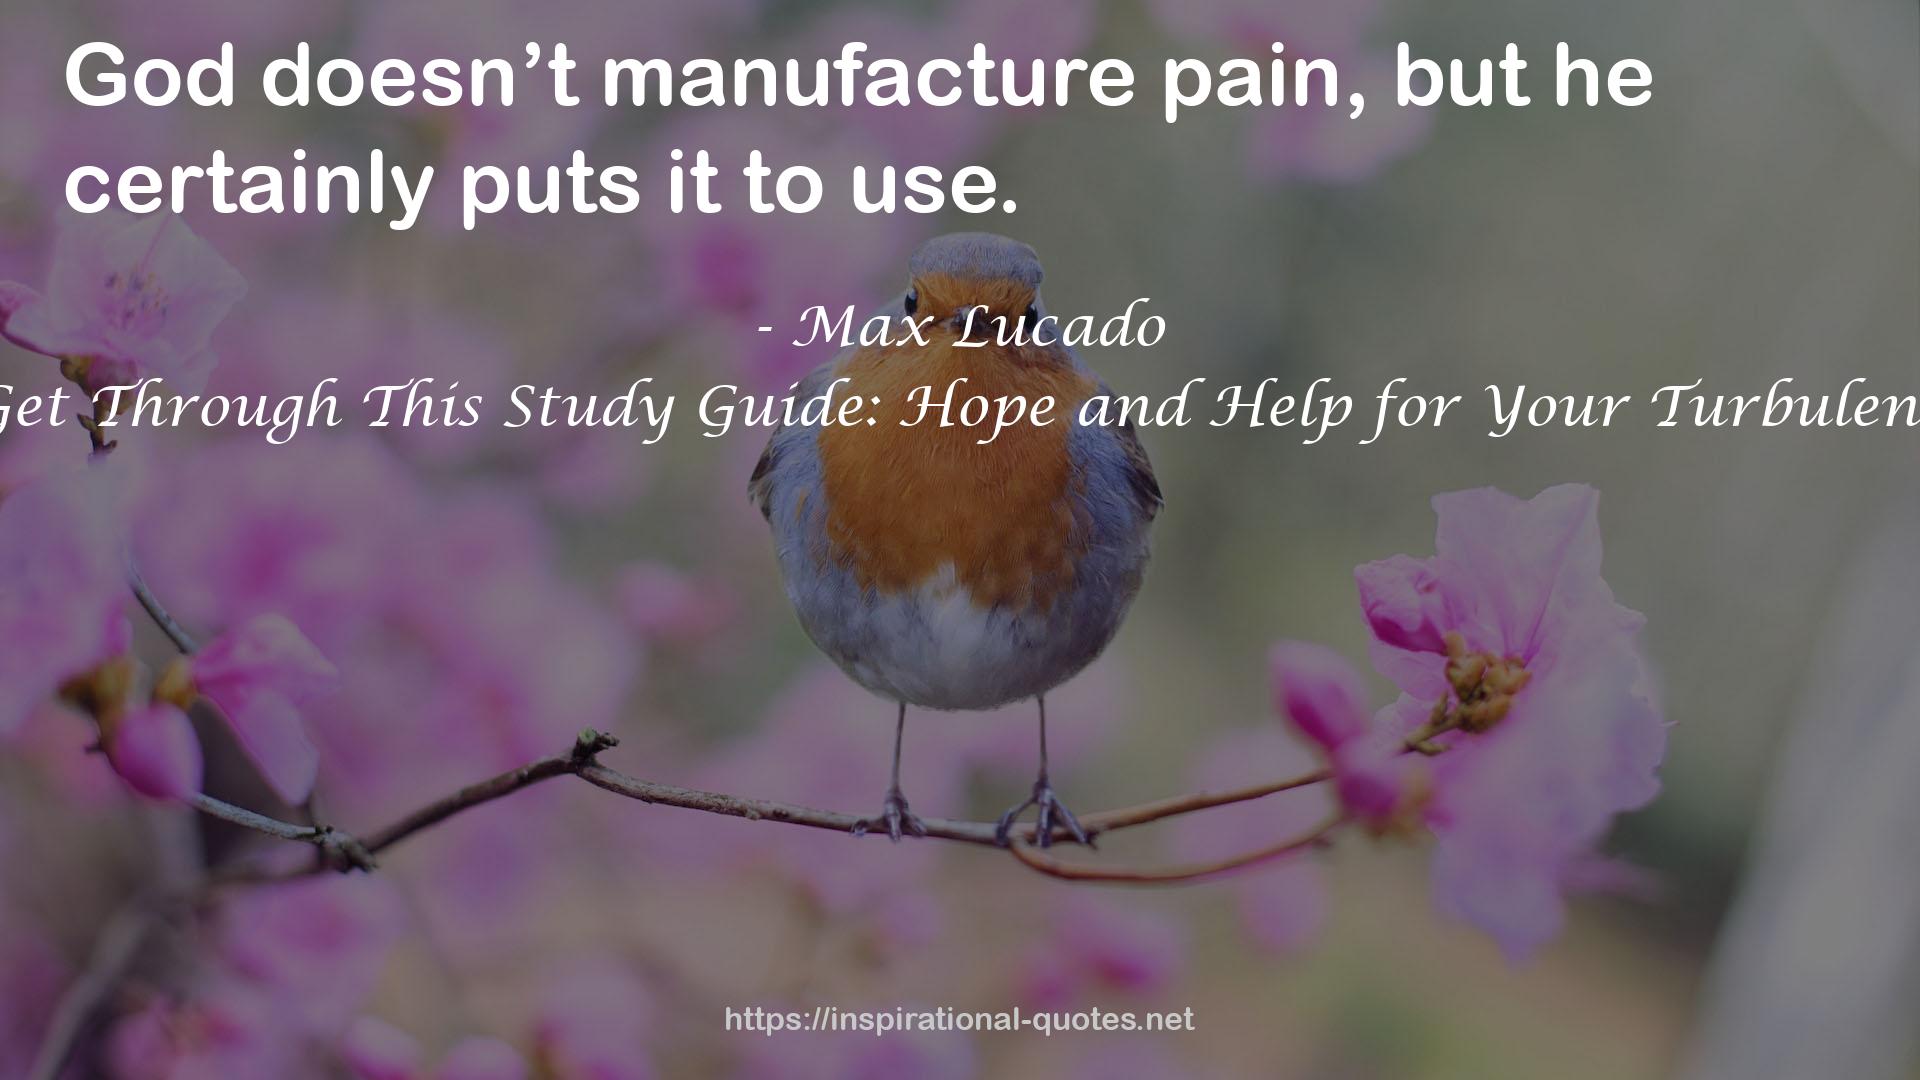 You'll Get Through This Study Guide: Hope and Help for Your Turbulent Times QUOTES